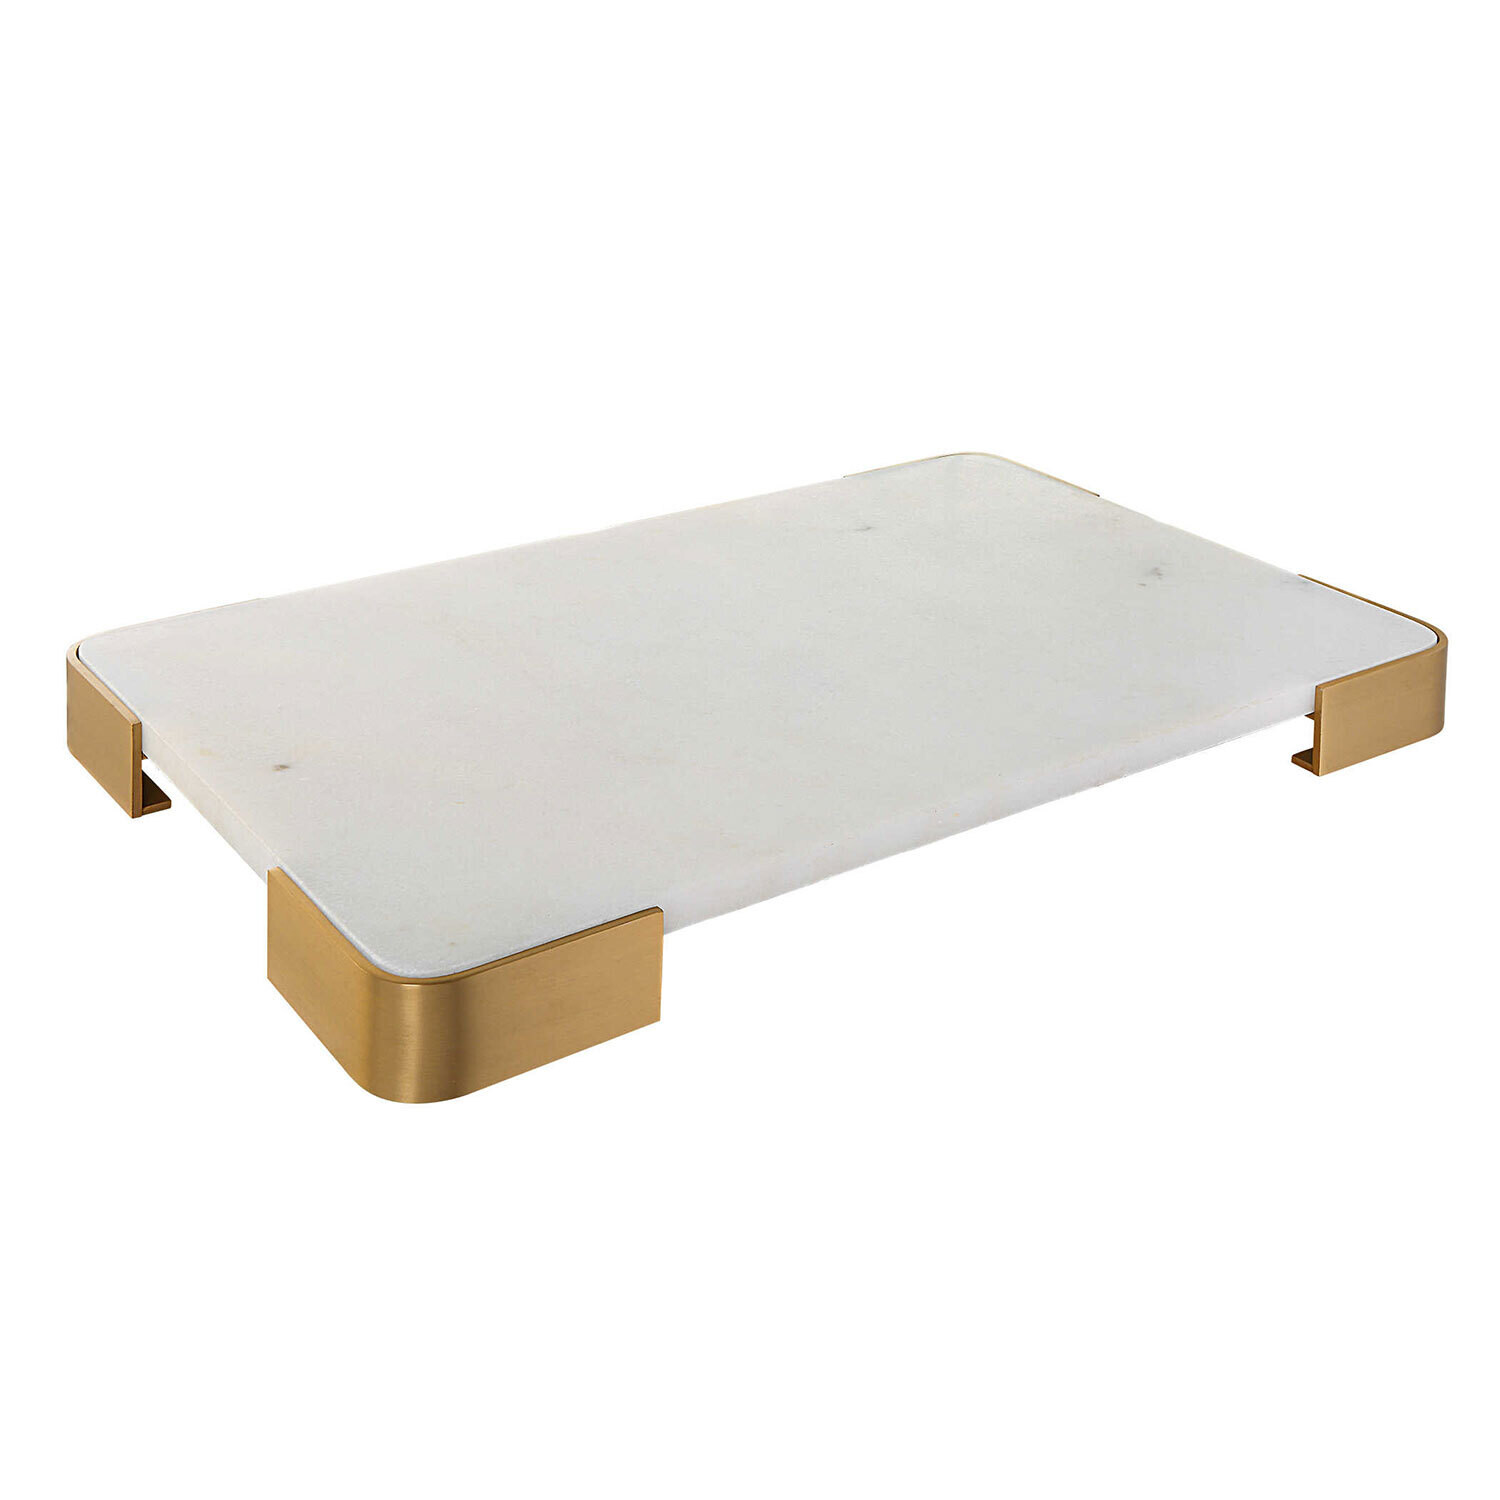 Elevated Tray-White Marble LG